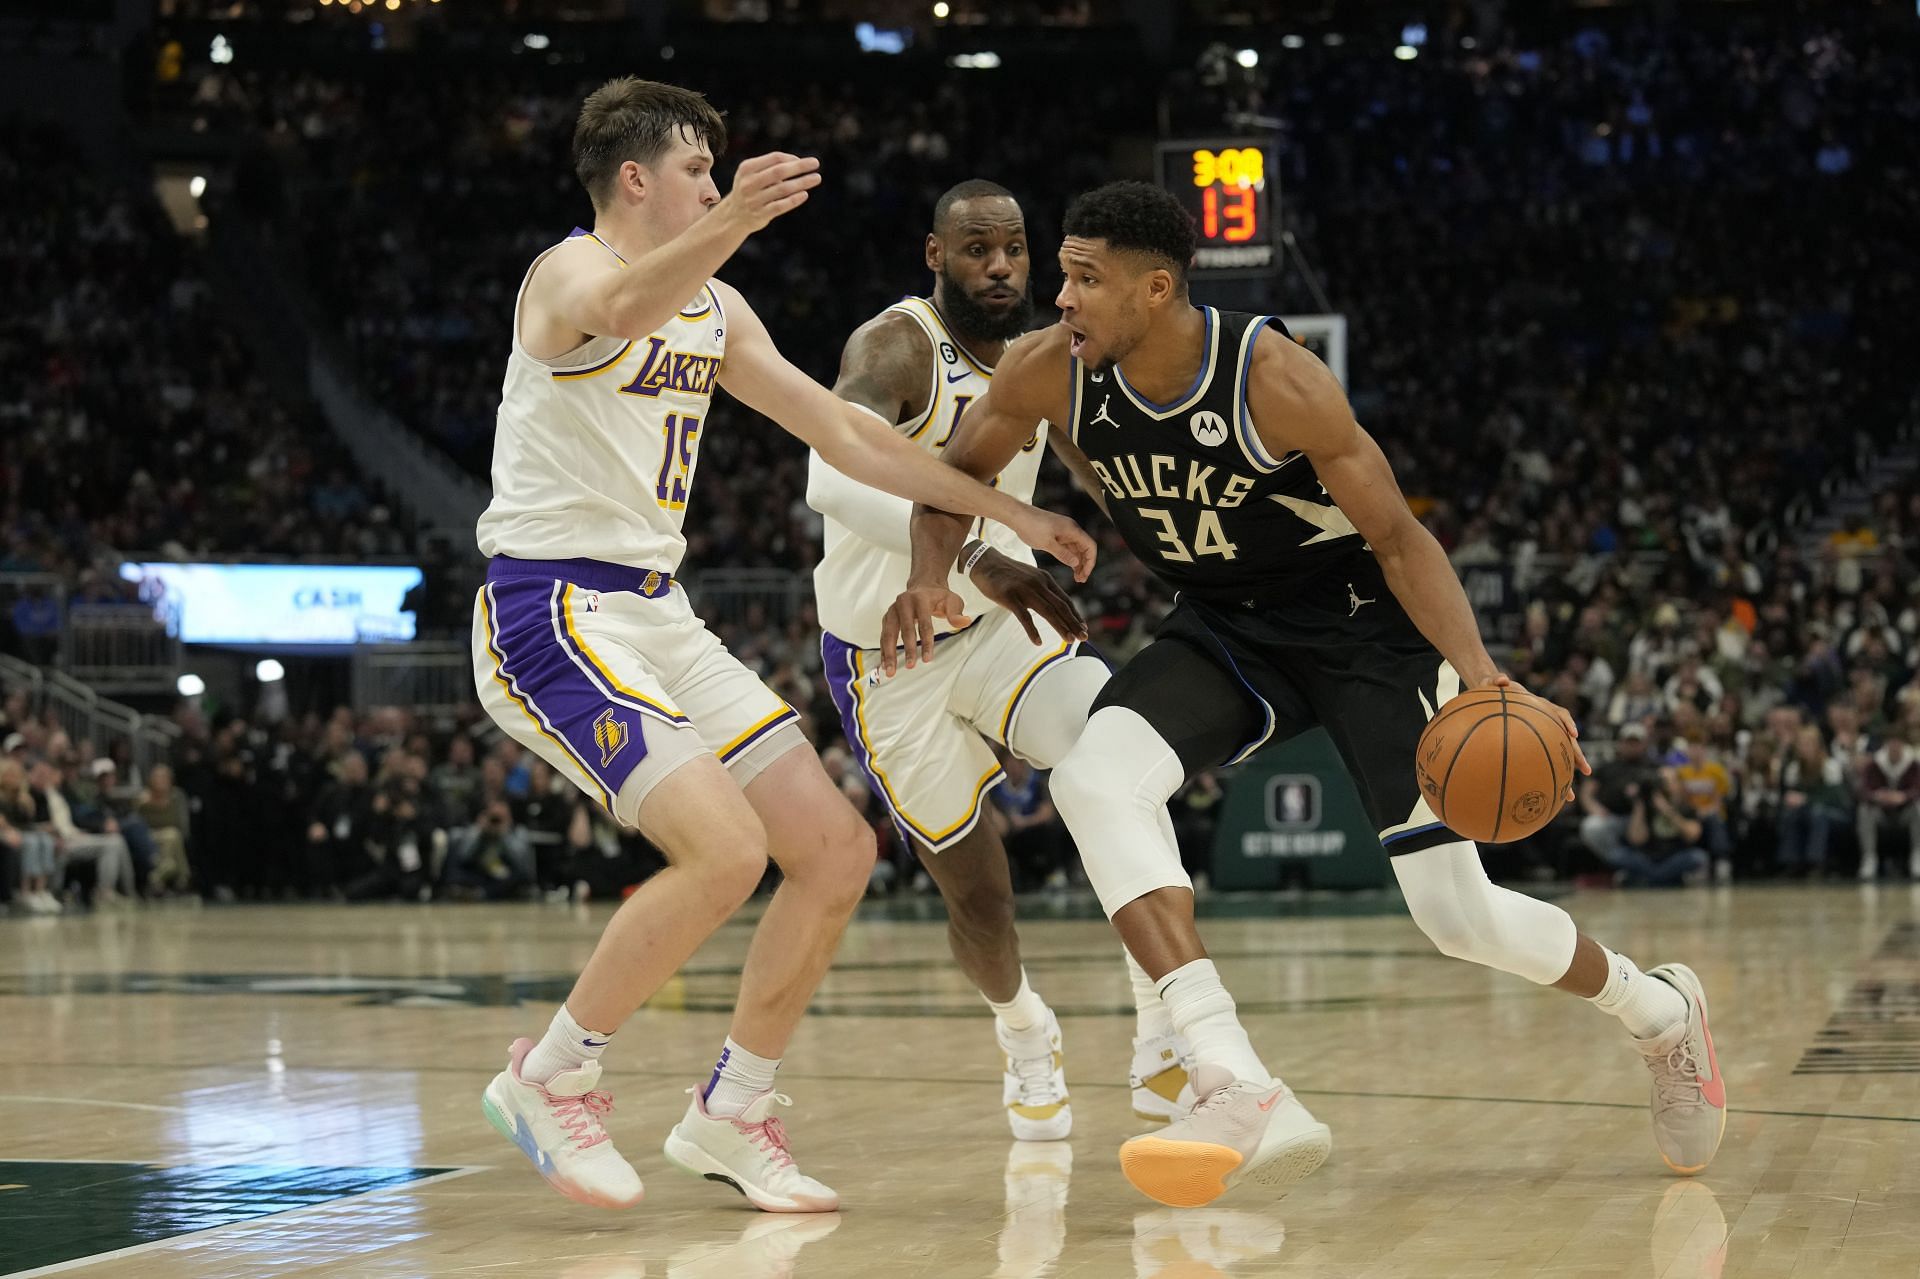 Giannis Antetokounmpo of the Milwaukee Bucks dribbles the ball against Austin Reaves and LeBron James of the Los Angeles Lakers.